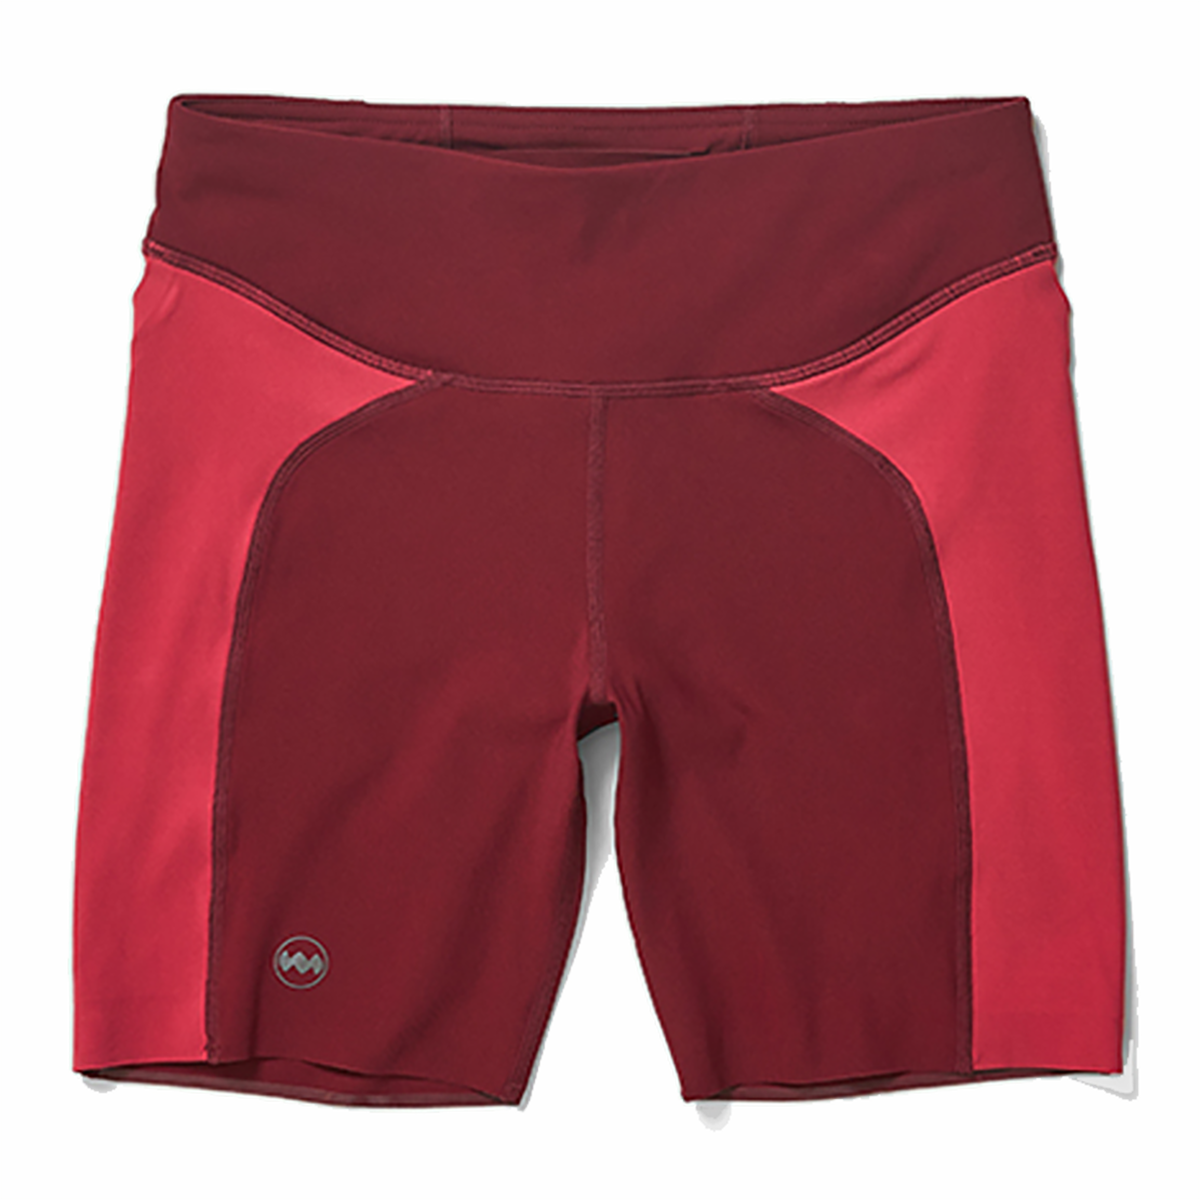 Janji 7" Groundwork Pace Short, , large image number null